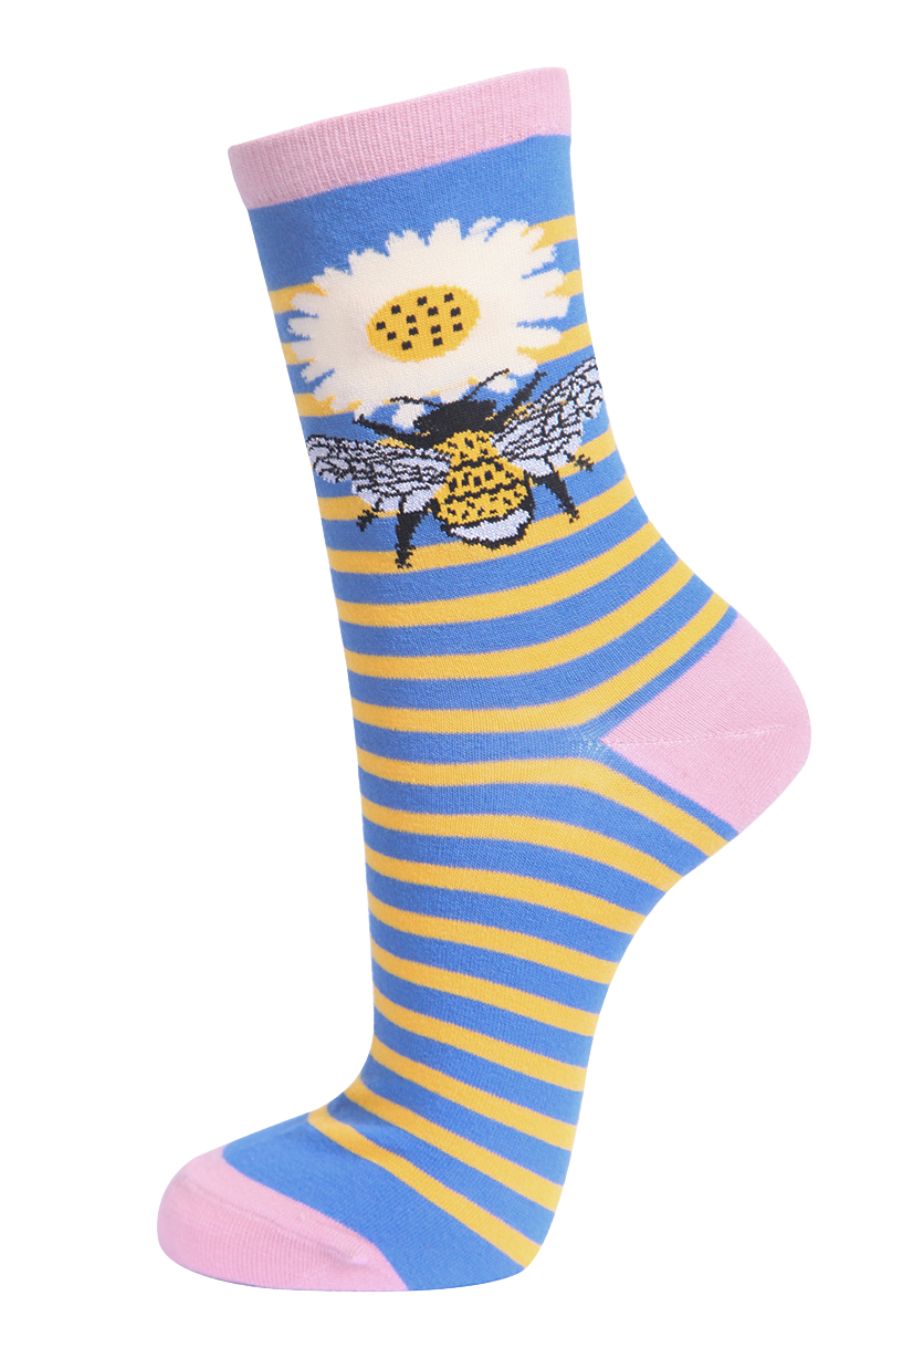 blue, yellow stripes ankle socks with a large bee and daisty flower, with pink toe, heel and trim